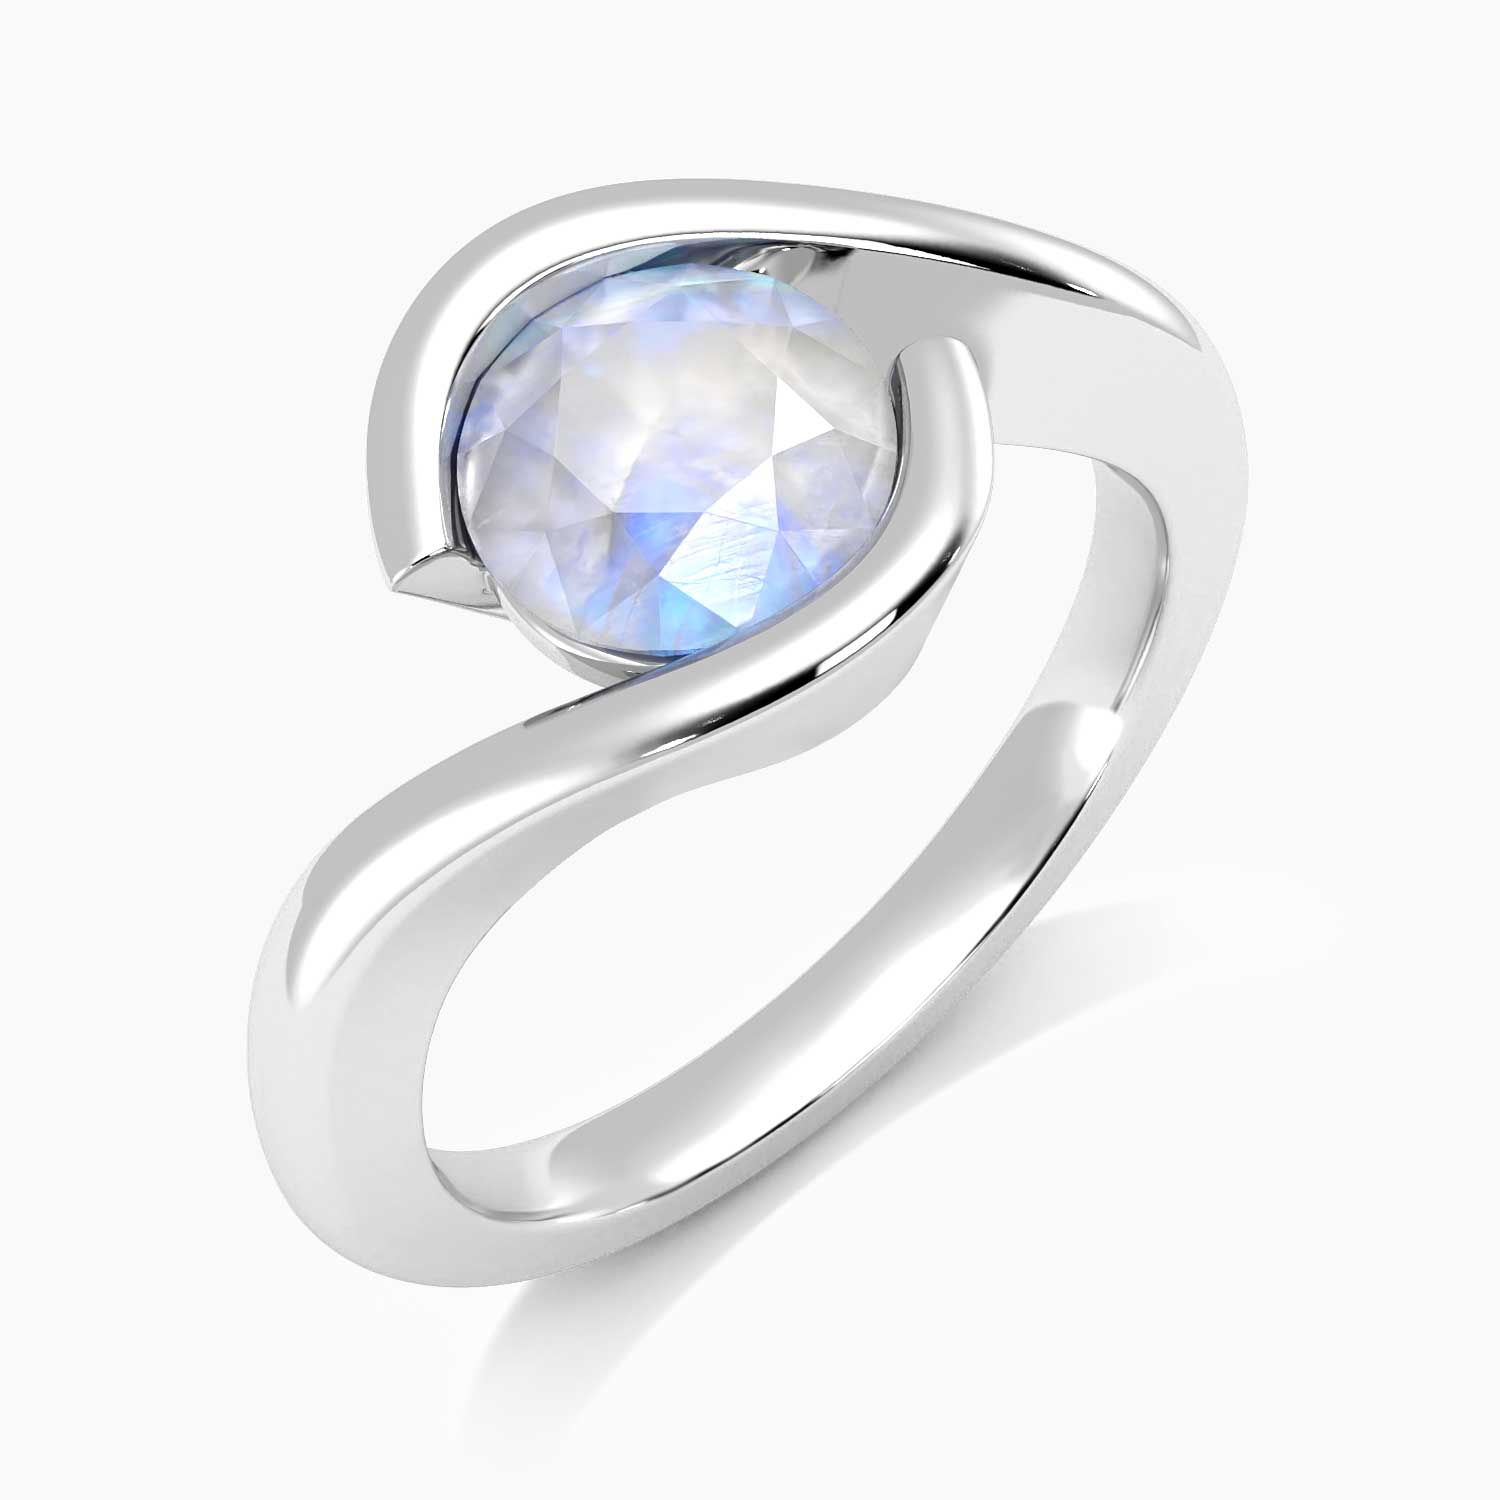 peripheral view of moonstone ring showcasing gemstone and setting